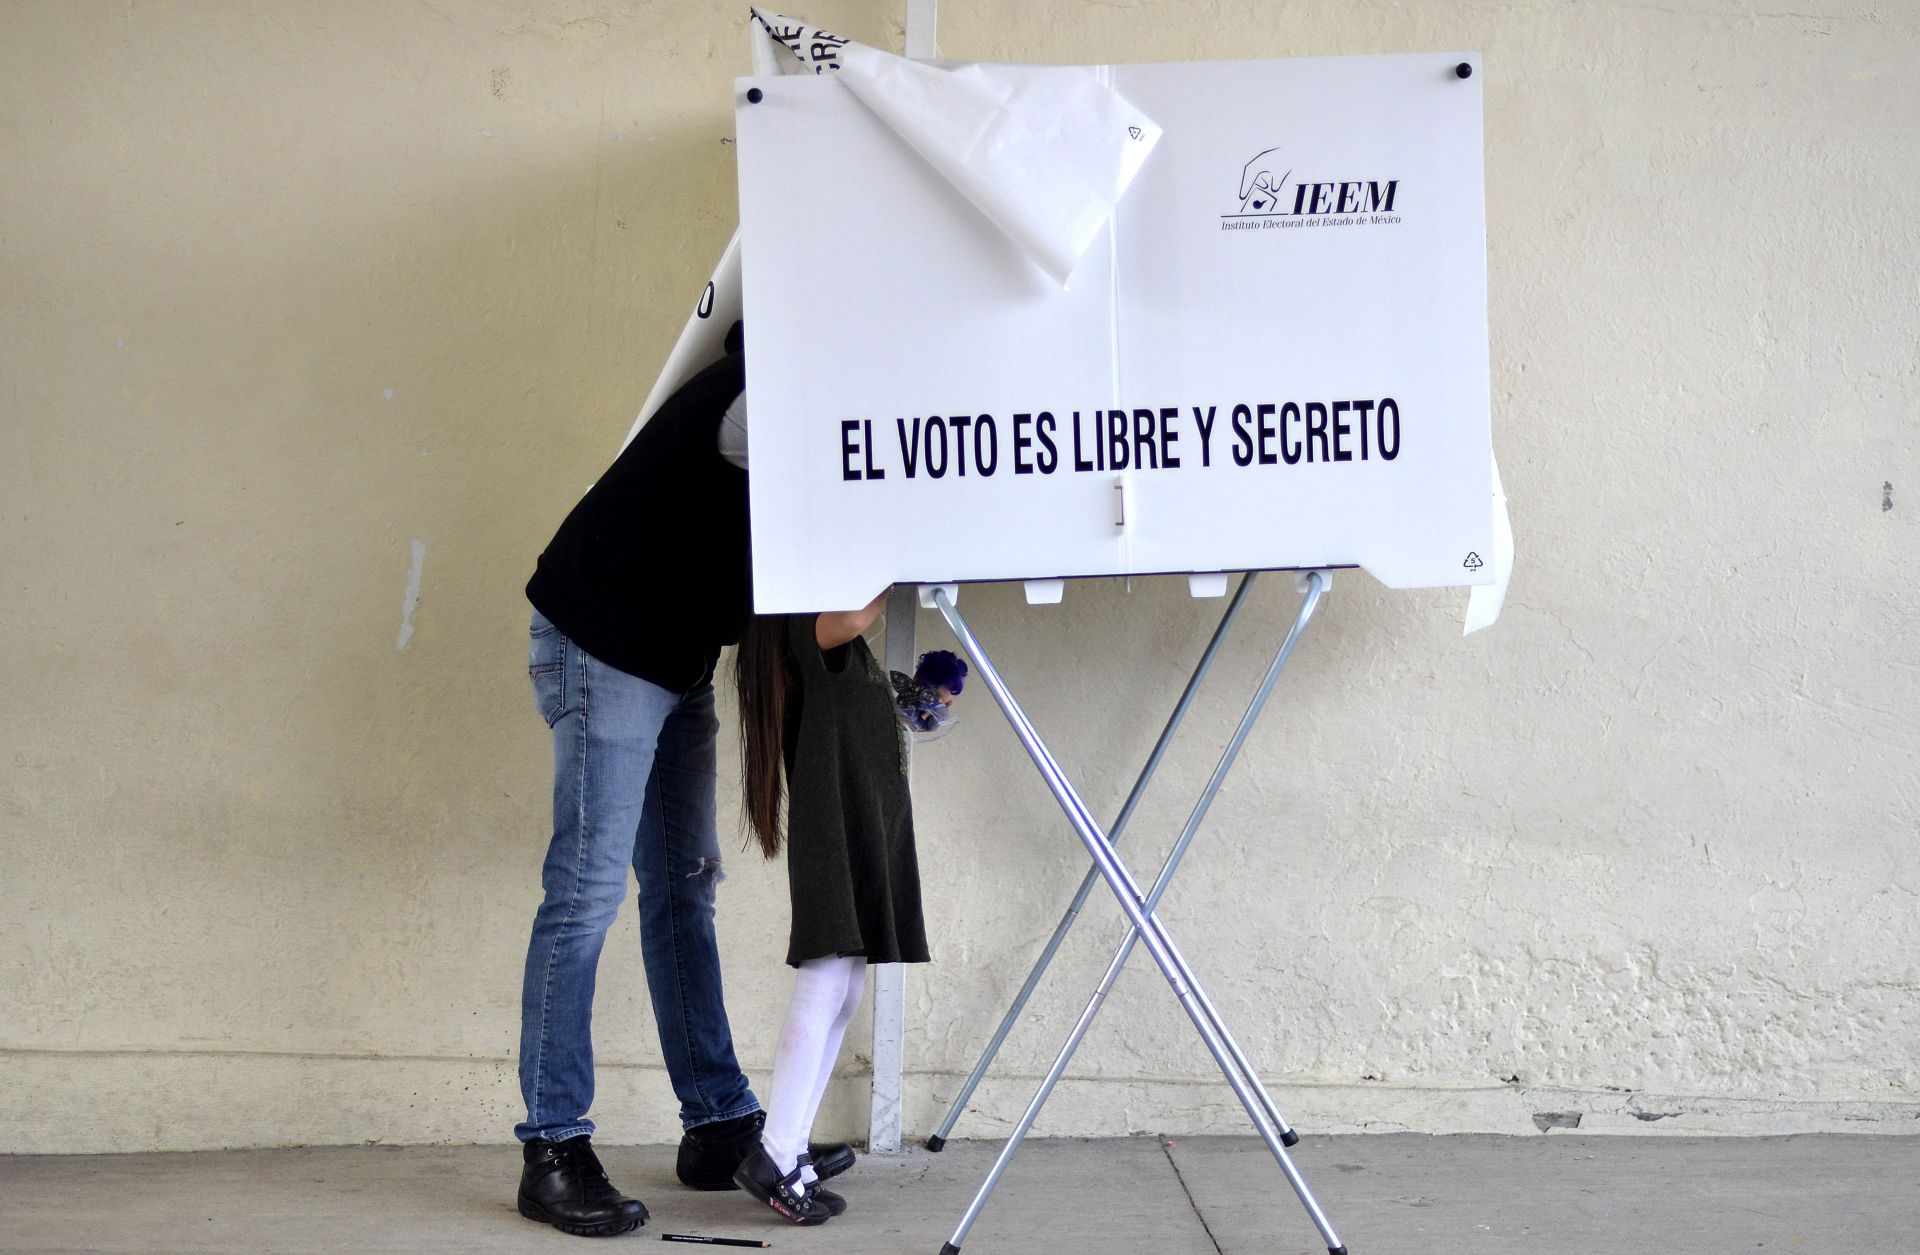 The results of the June 4 gubernatorial election in Mexico state confirmed that the National Regeneration Movement (Morena) is a force to be reckoned with.